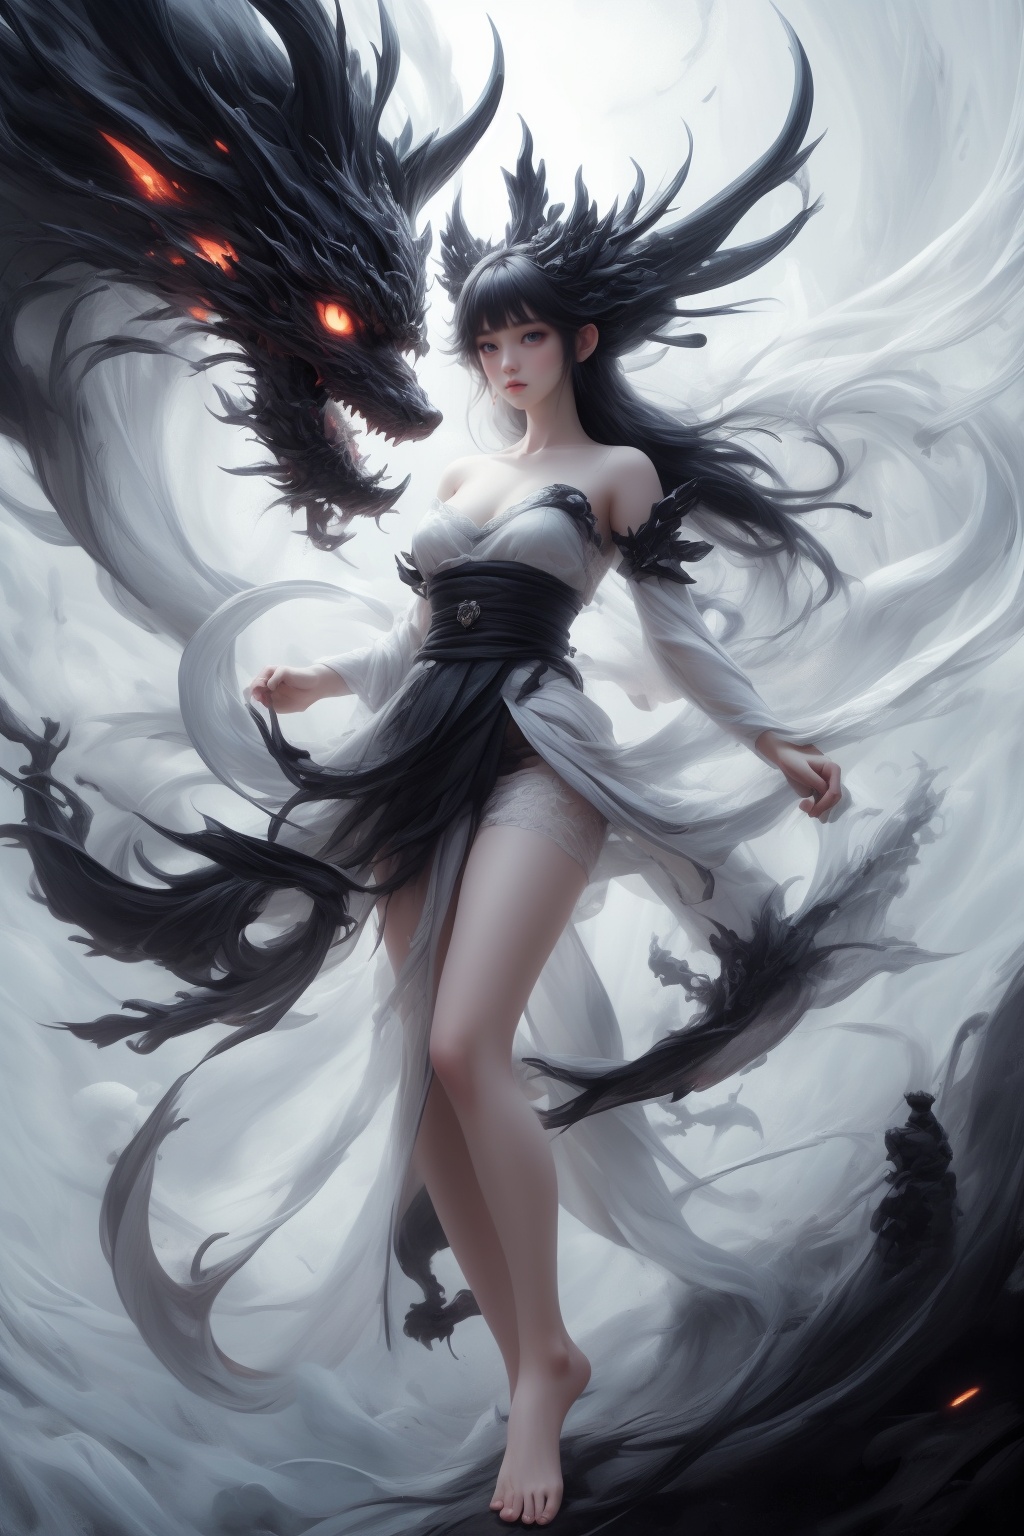 style of Karol Bak,the 1girl with white hanfu is standing in front of the black (chinese_dragon),bare legs,barefoot,dynamic pose,looking away,in the style of otherworldly beings,animecore,dark and menacing,intricate illustrations,delicate linework,fine details,whimsical patterns,enchanting scenes,dreamy visuals,captivating storytelling,gorecore,enigmatic characters,twisted characters,depth of field,floating,dynamic angle,long exposure,(motion blur):1.2,fluid movement,ethereal atmosphere,dreamy trails,dynamic energy,time-lapse effect,